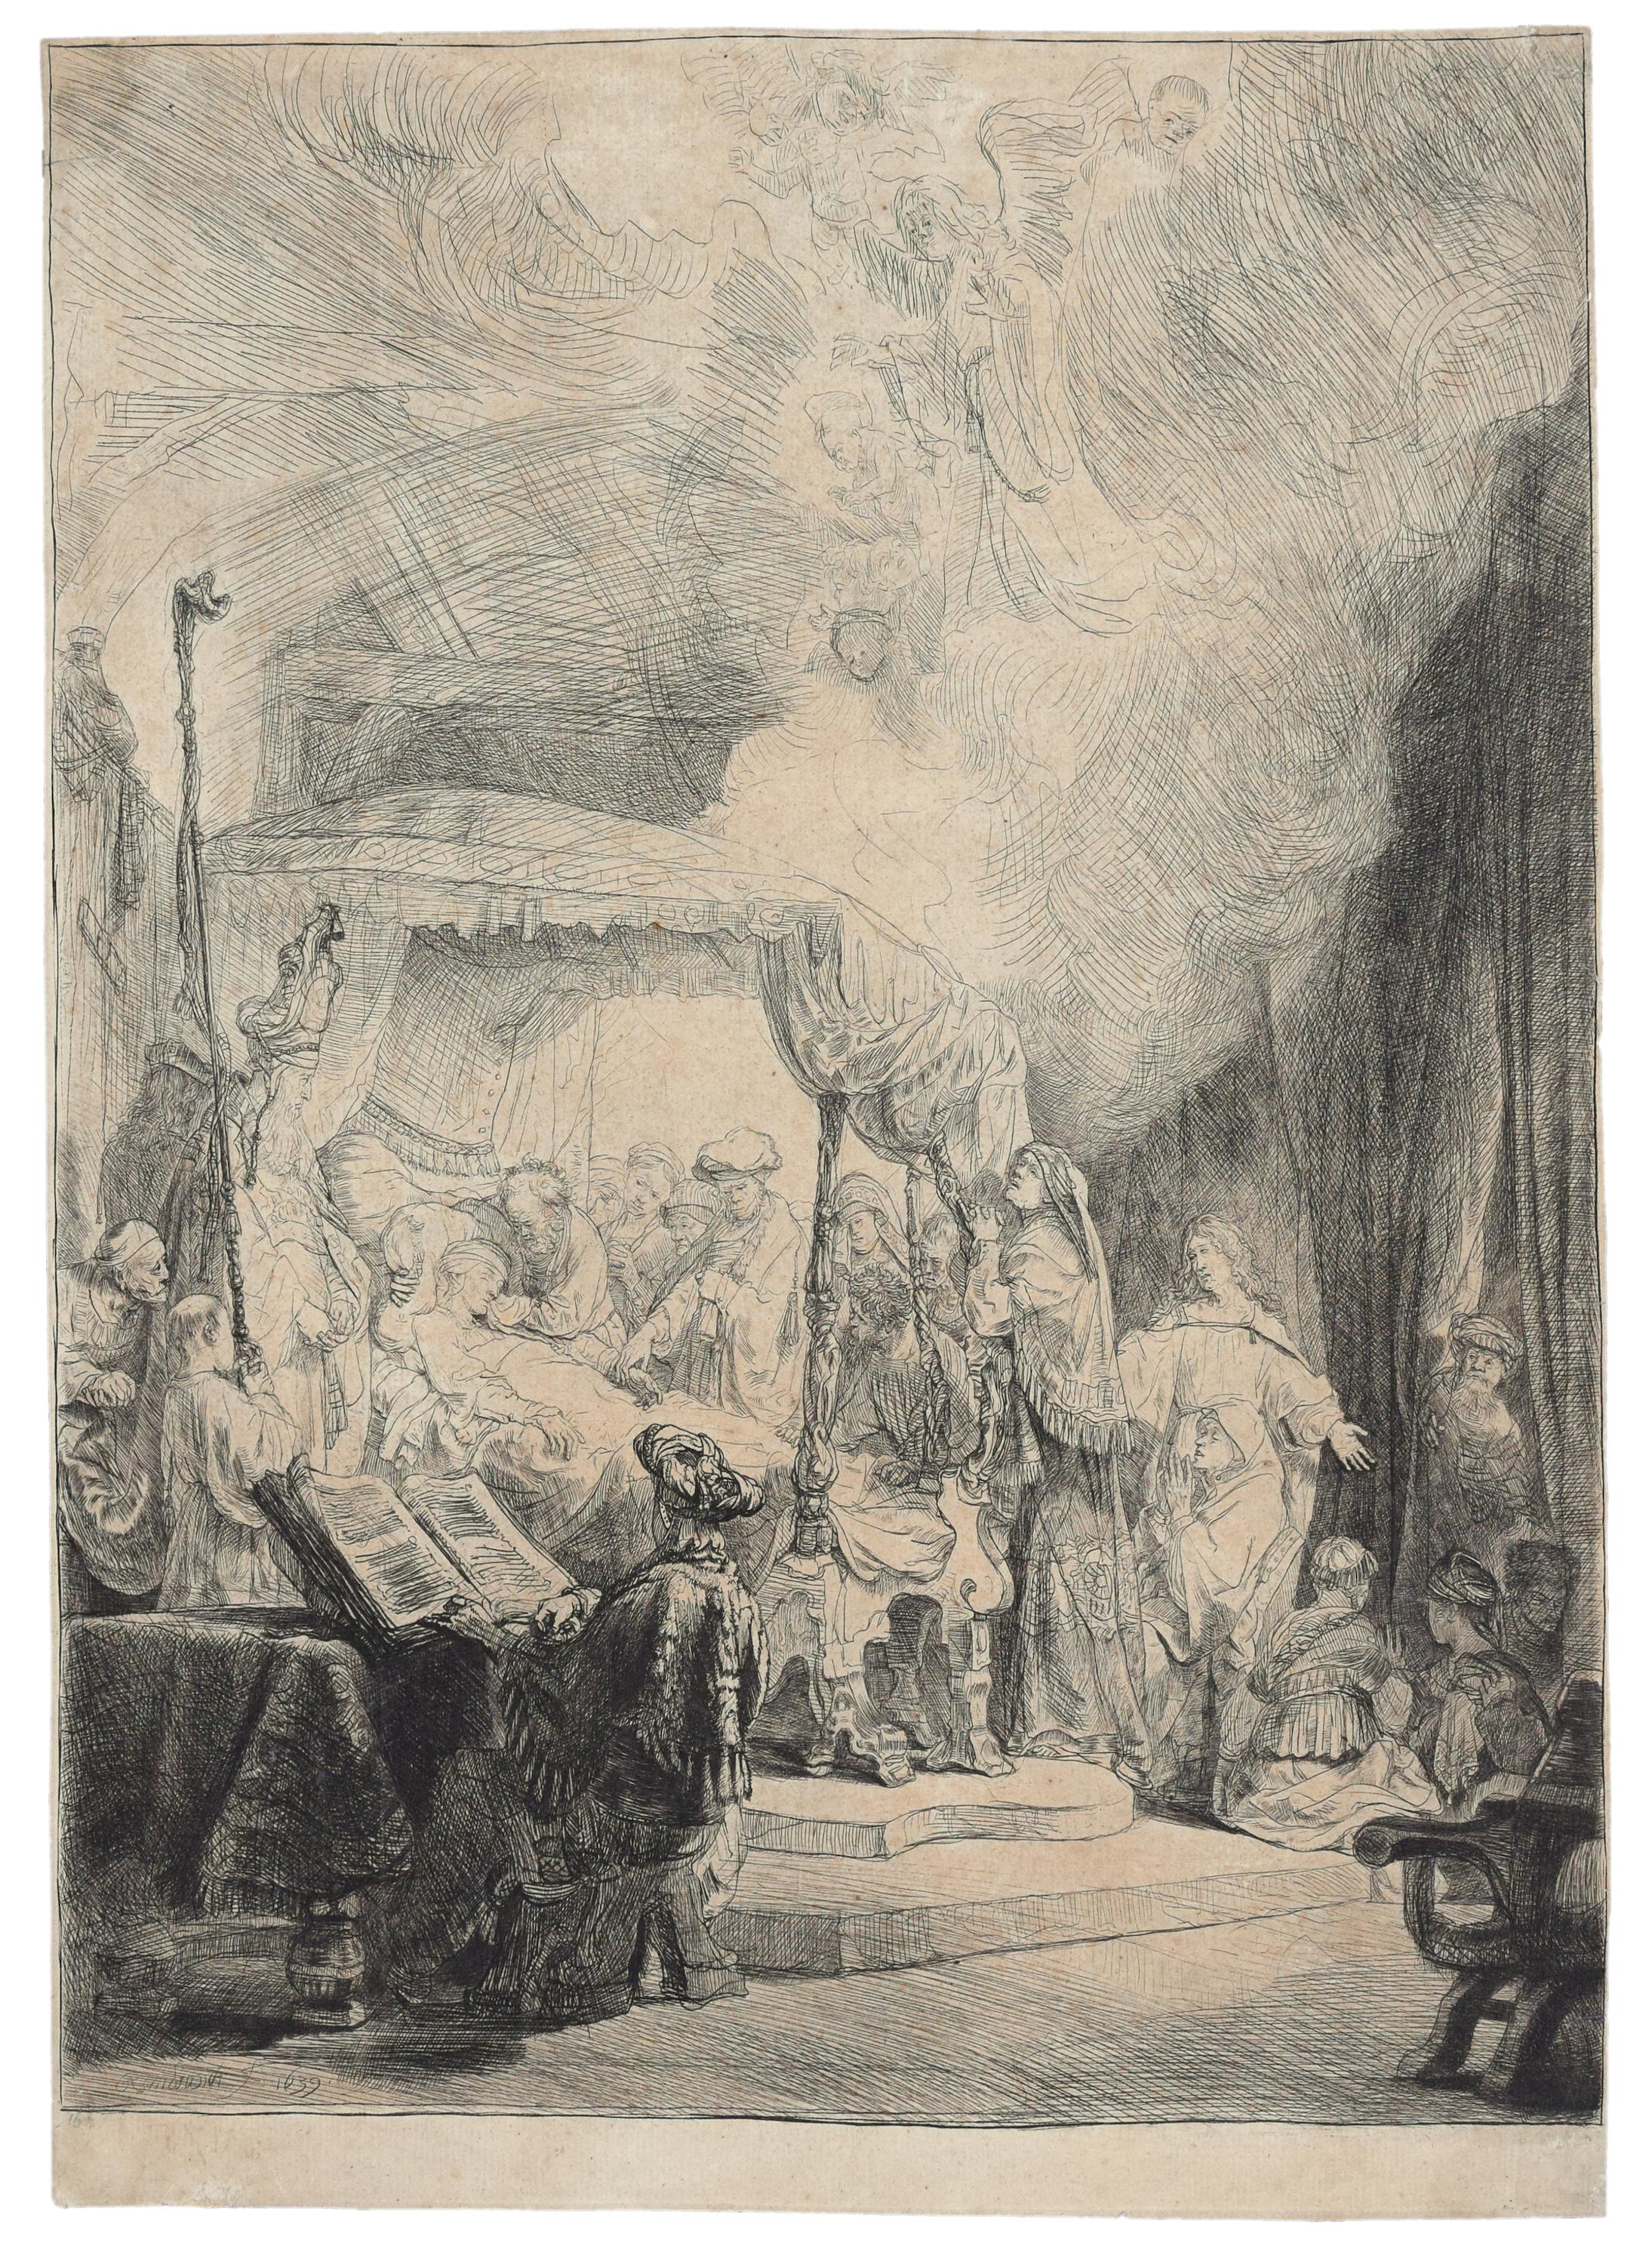 The Death of the Virgin - Original Etching by Rembrandt - 1639